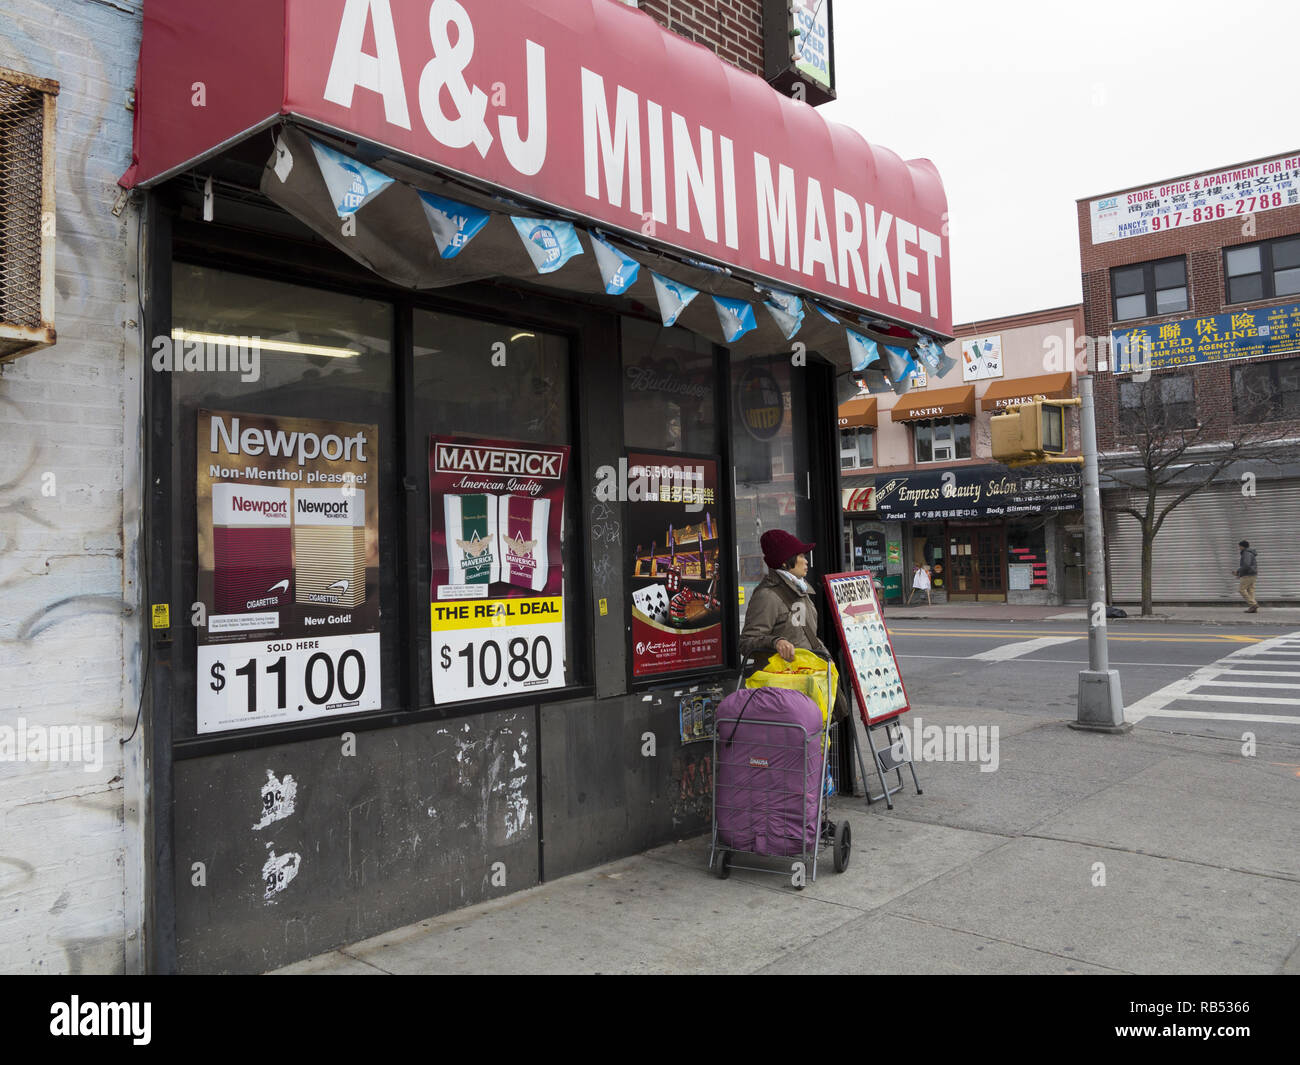 Chinese woman stands in front of mini market in the predominantly Chinese neighborhood of the Bensonhurst section of Brooklyn, NY. Cigarette ads and a Stock Photo